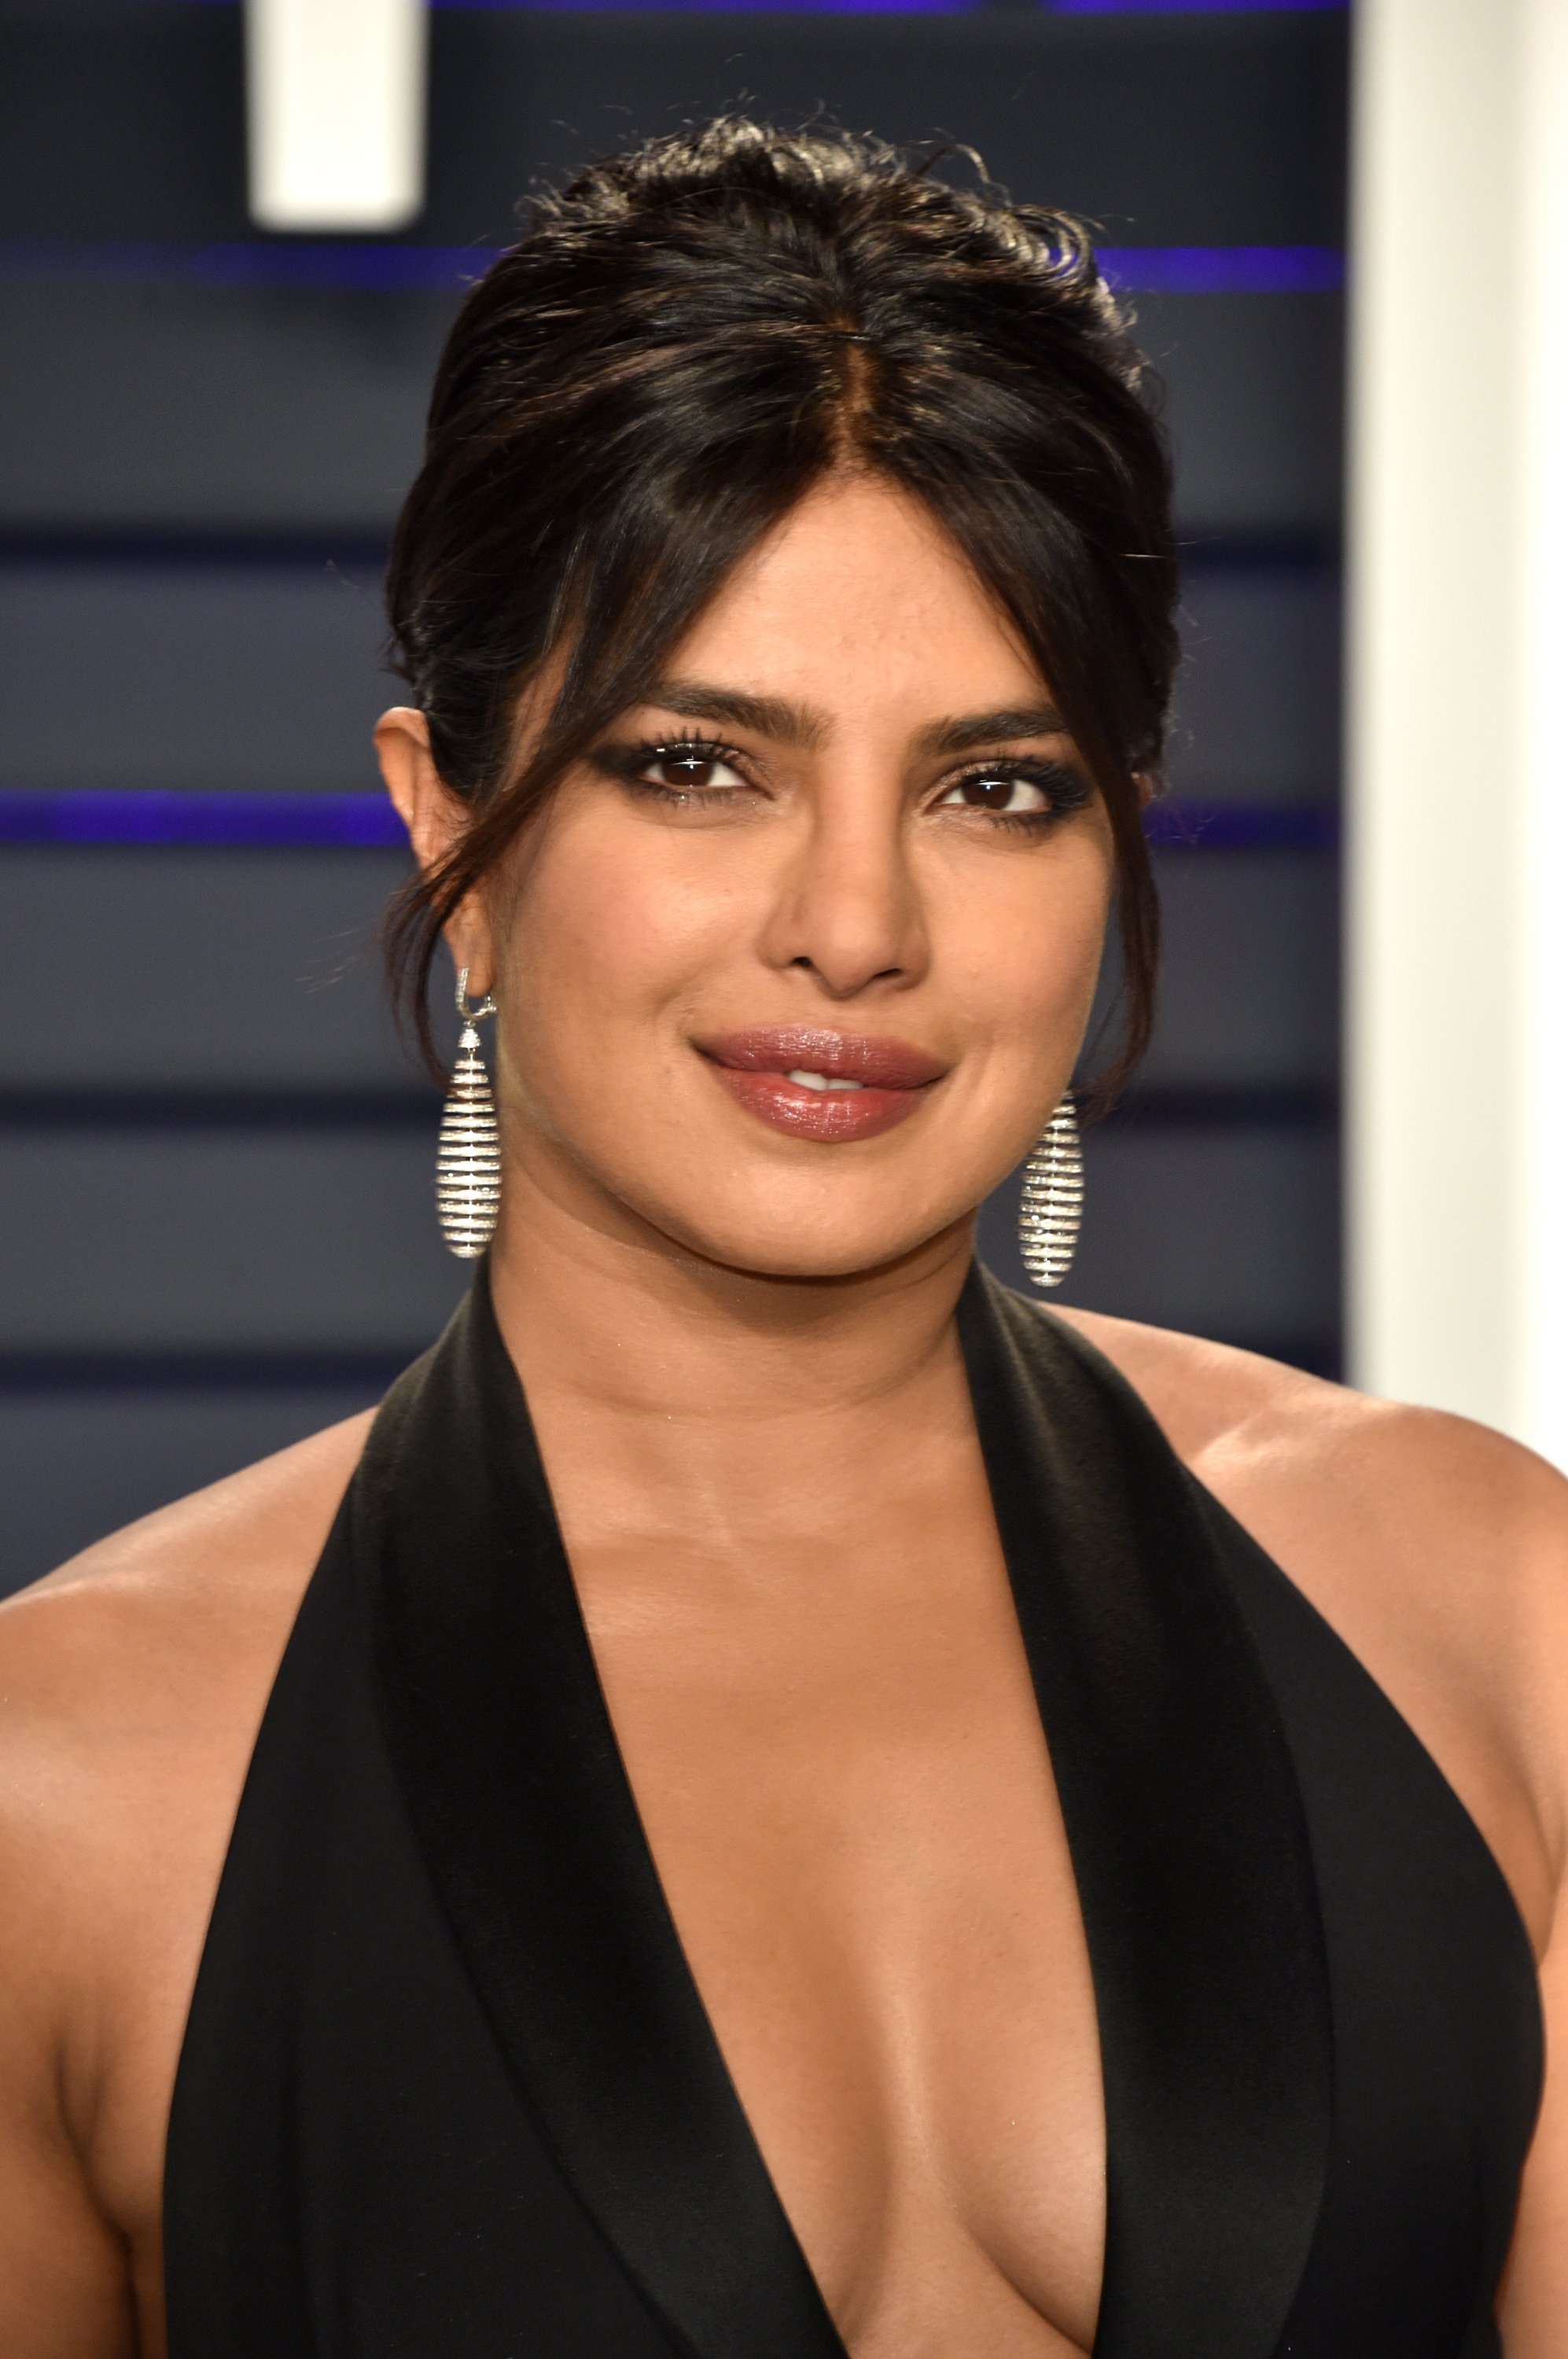 Priyanka Chopra attends the Vanity Fair Oscar Party in Beverly Hills, California on February 24, 2019 | Photo: Getty Images